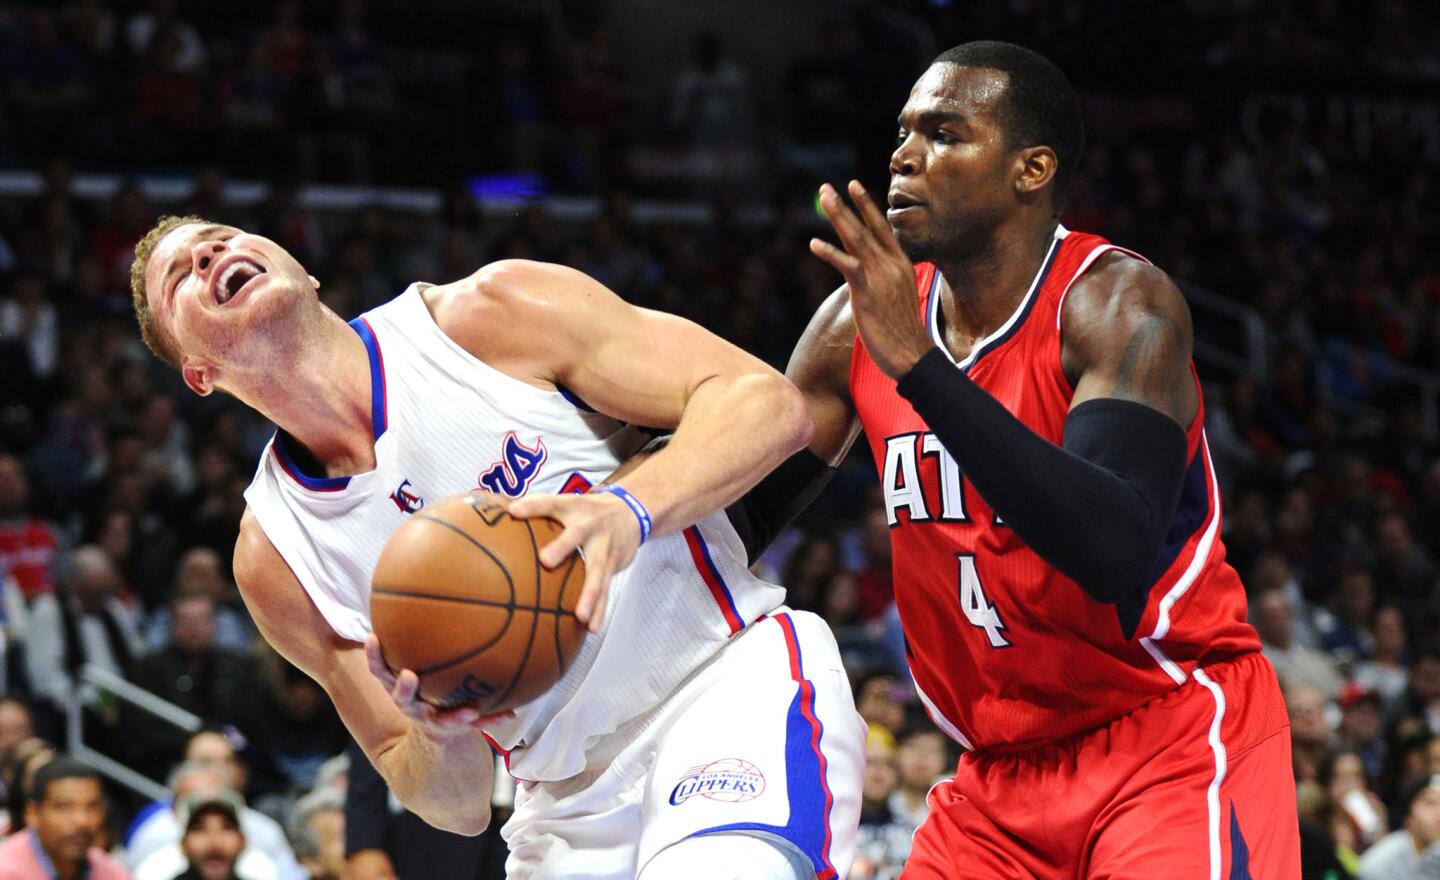 Clippers forward Blake Griffin is fouled by Hawks forward Paul Millsap while trying to score Monday night.